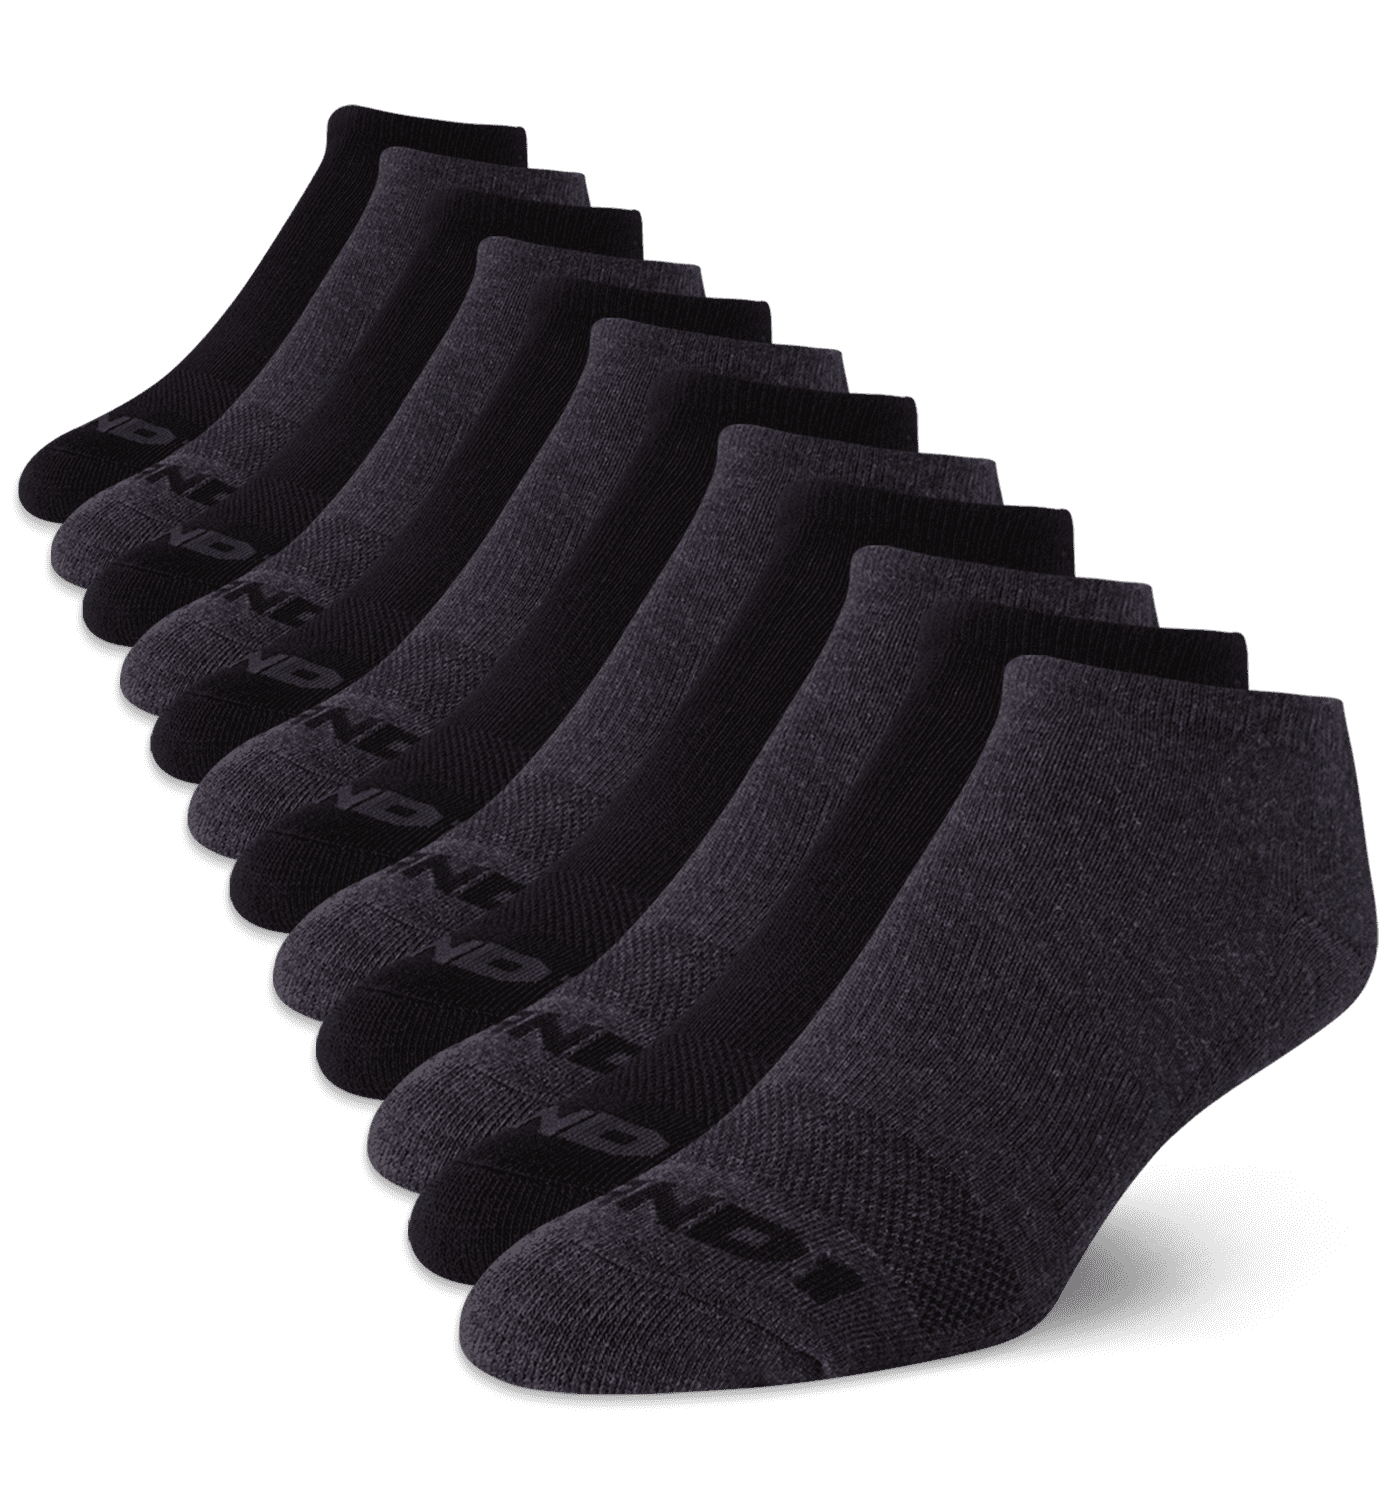 AND1 Men's Cushion Low Cut Sock, 12 Pack 